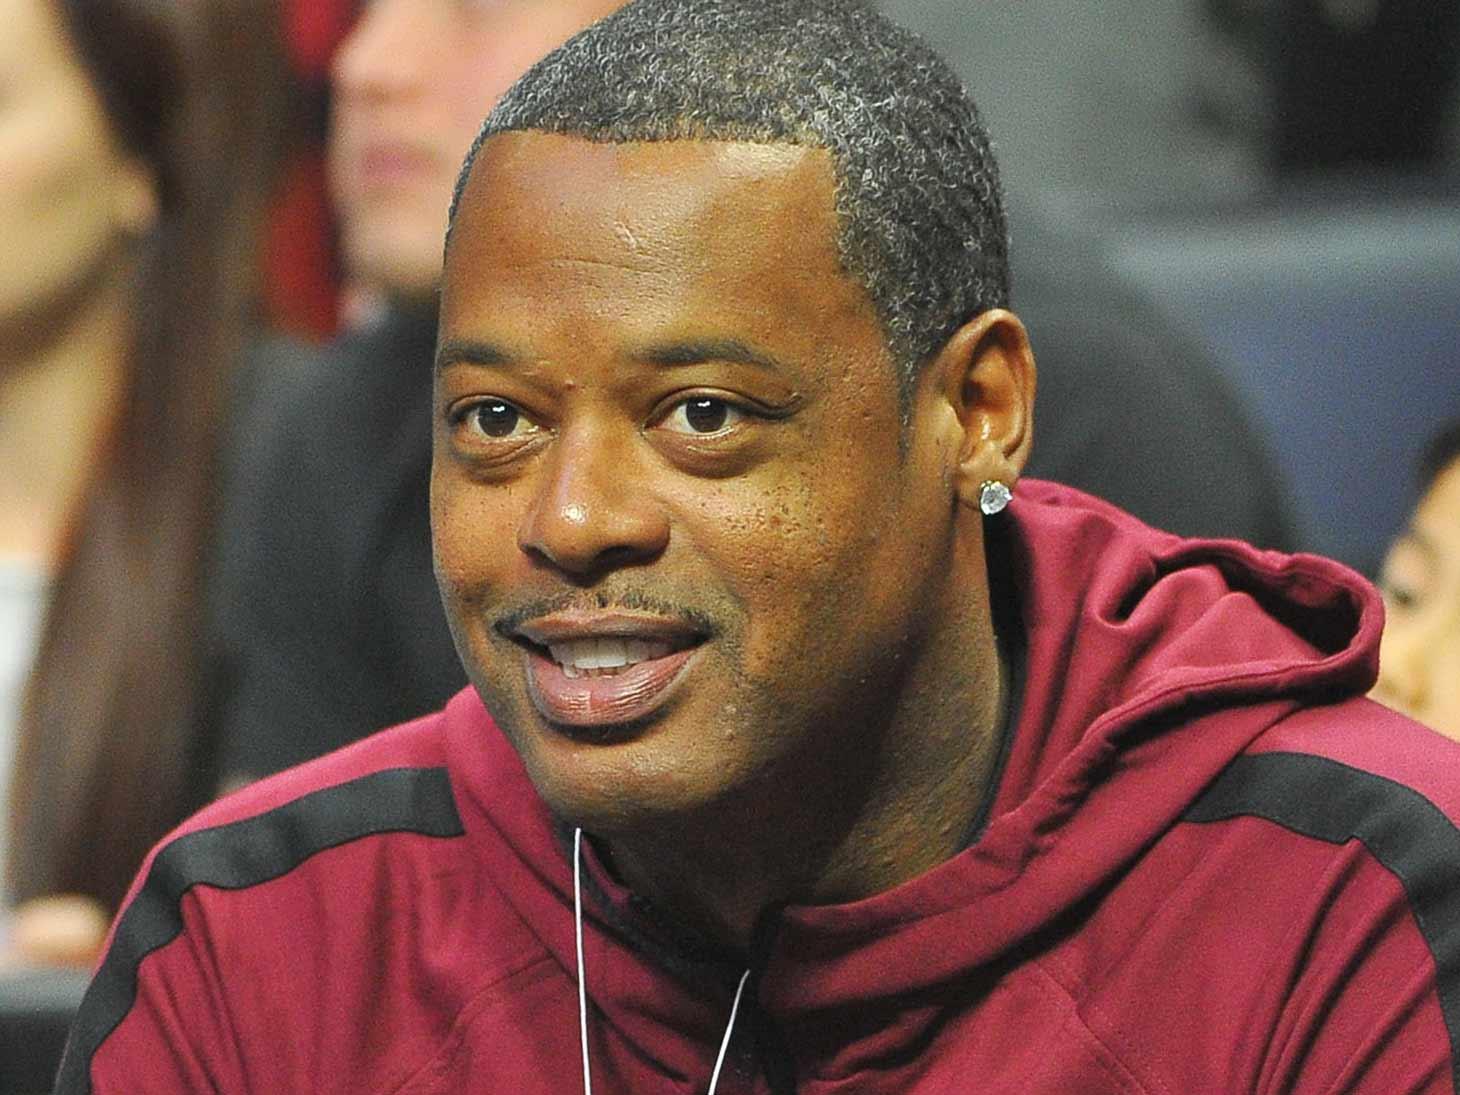 Former NBA Star Marcus Camby Settles Legal Battle Over Secret Love Child, Agrees to Pay $4k a Month in Support